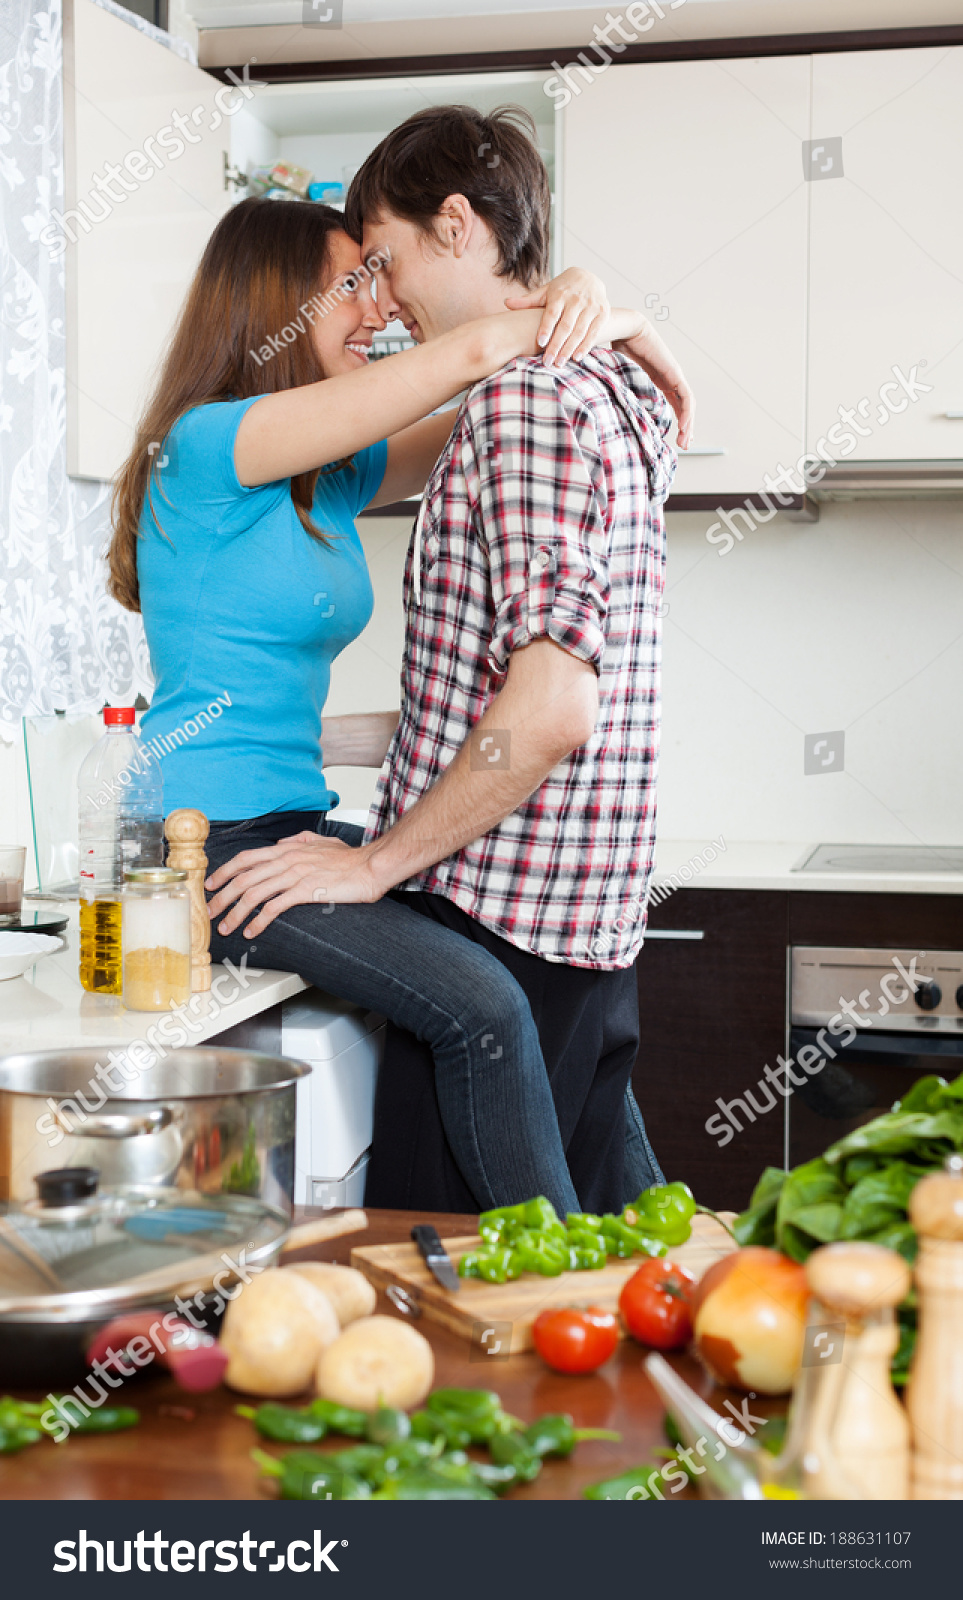 doing sex in the kitchen